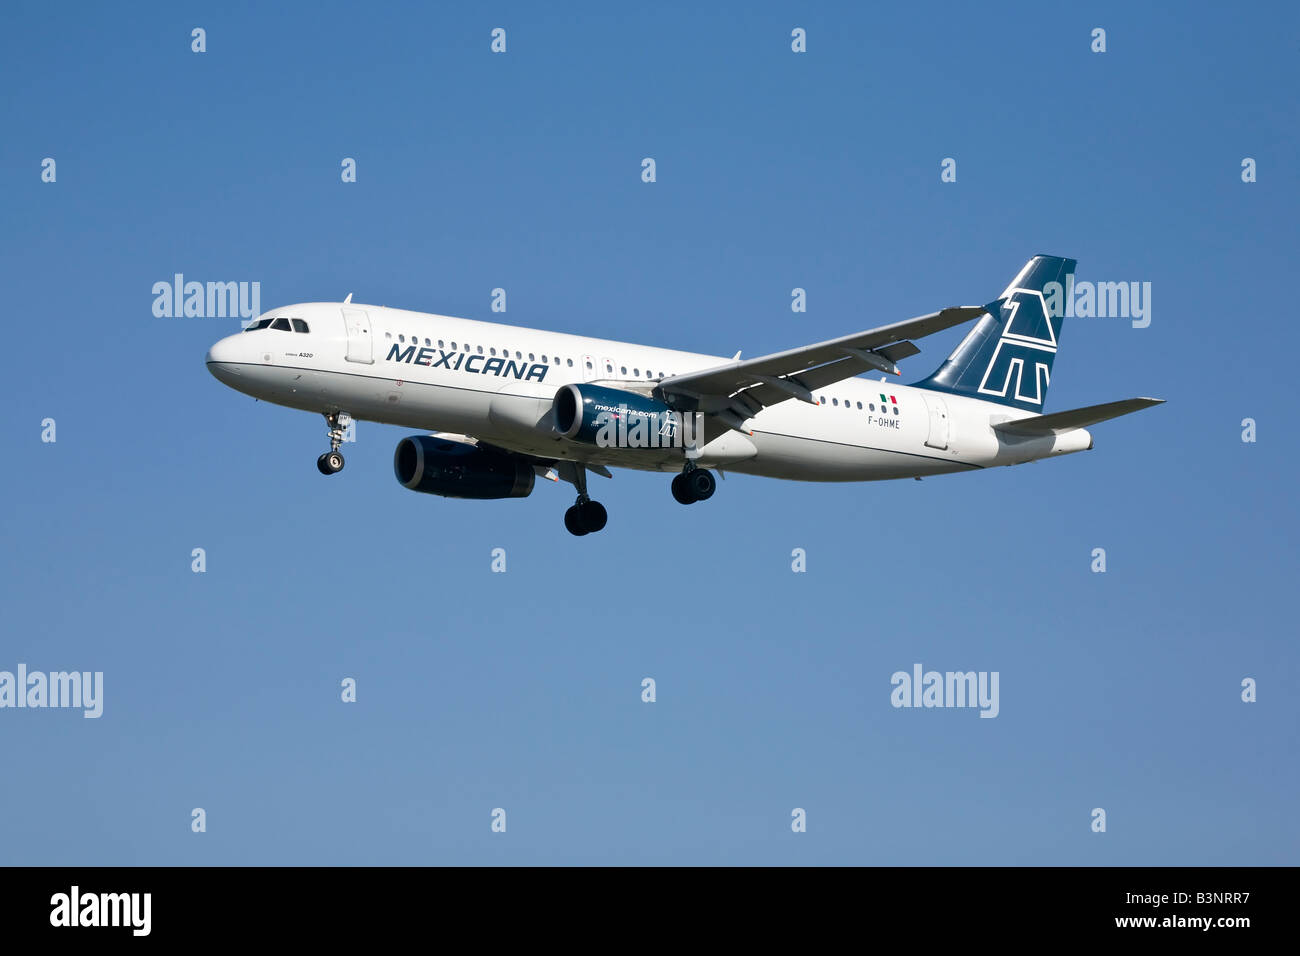 An Airbus A320 of the mexican airline Mexicana Stock Photo